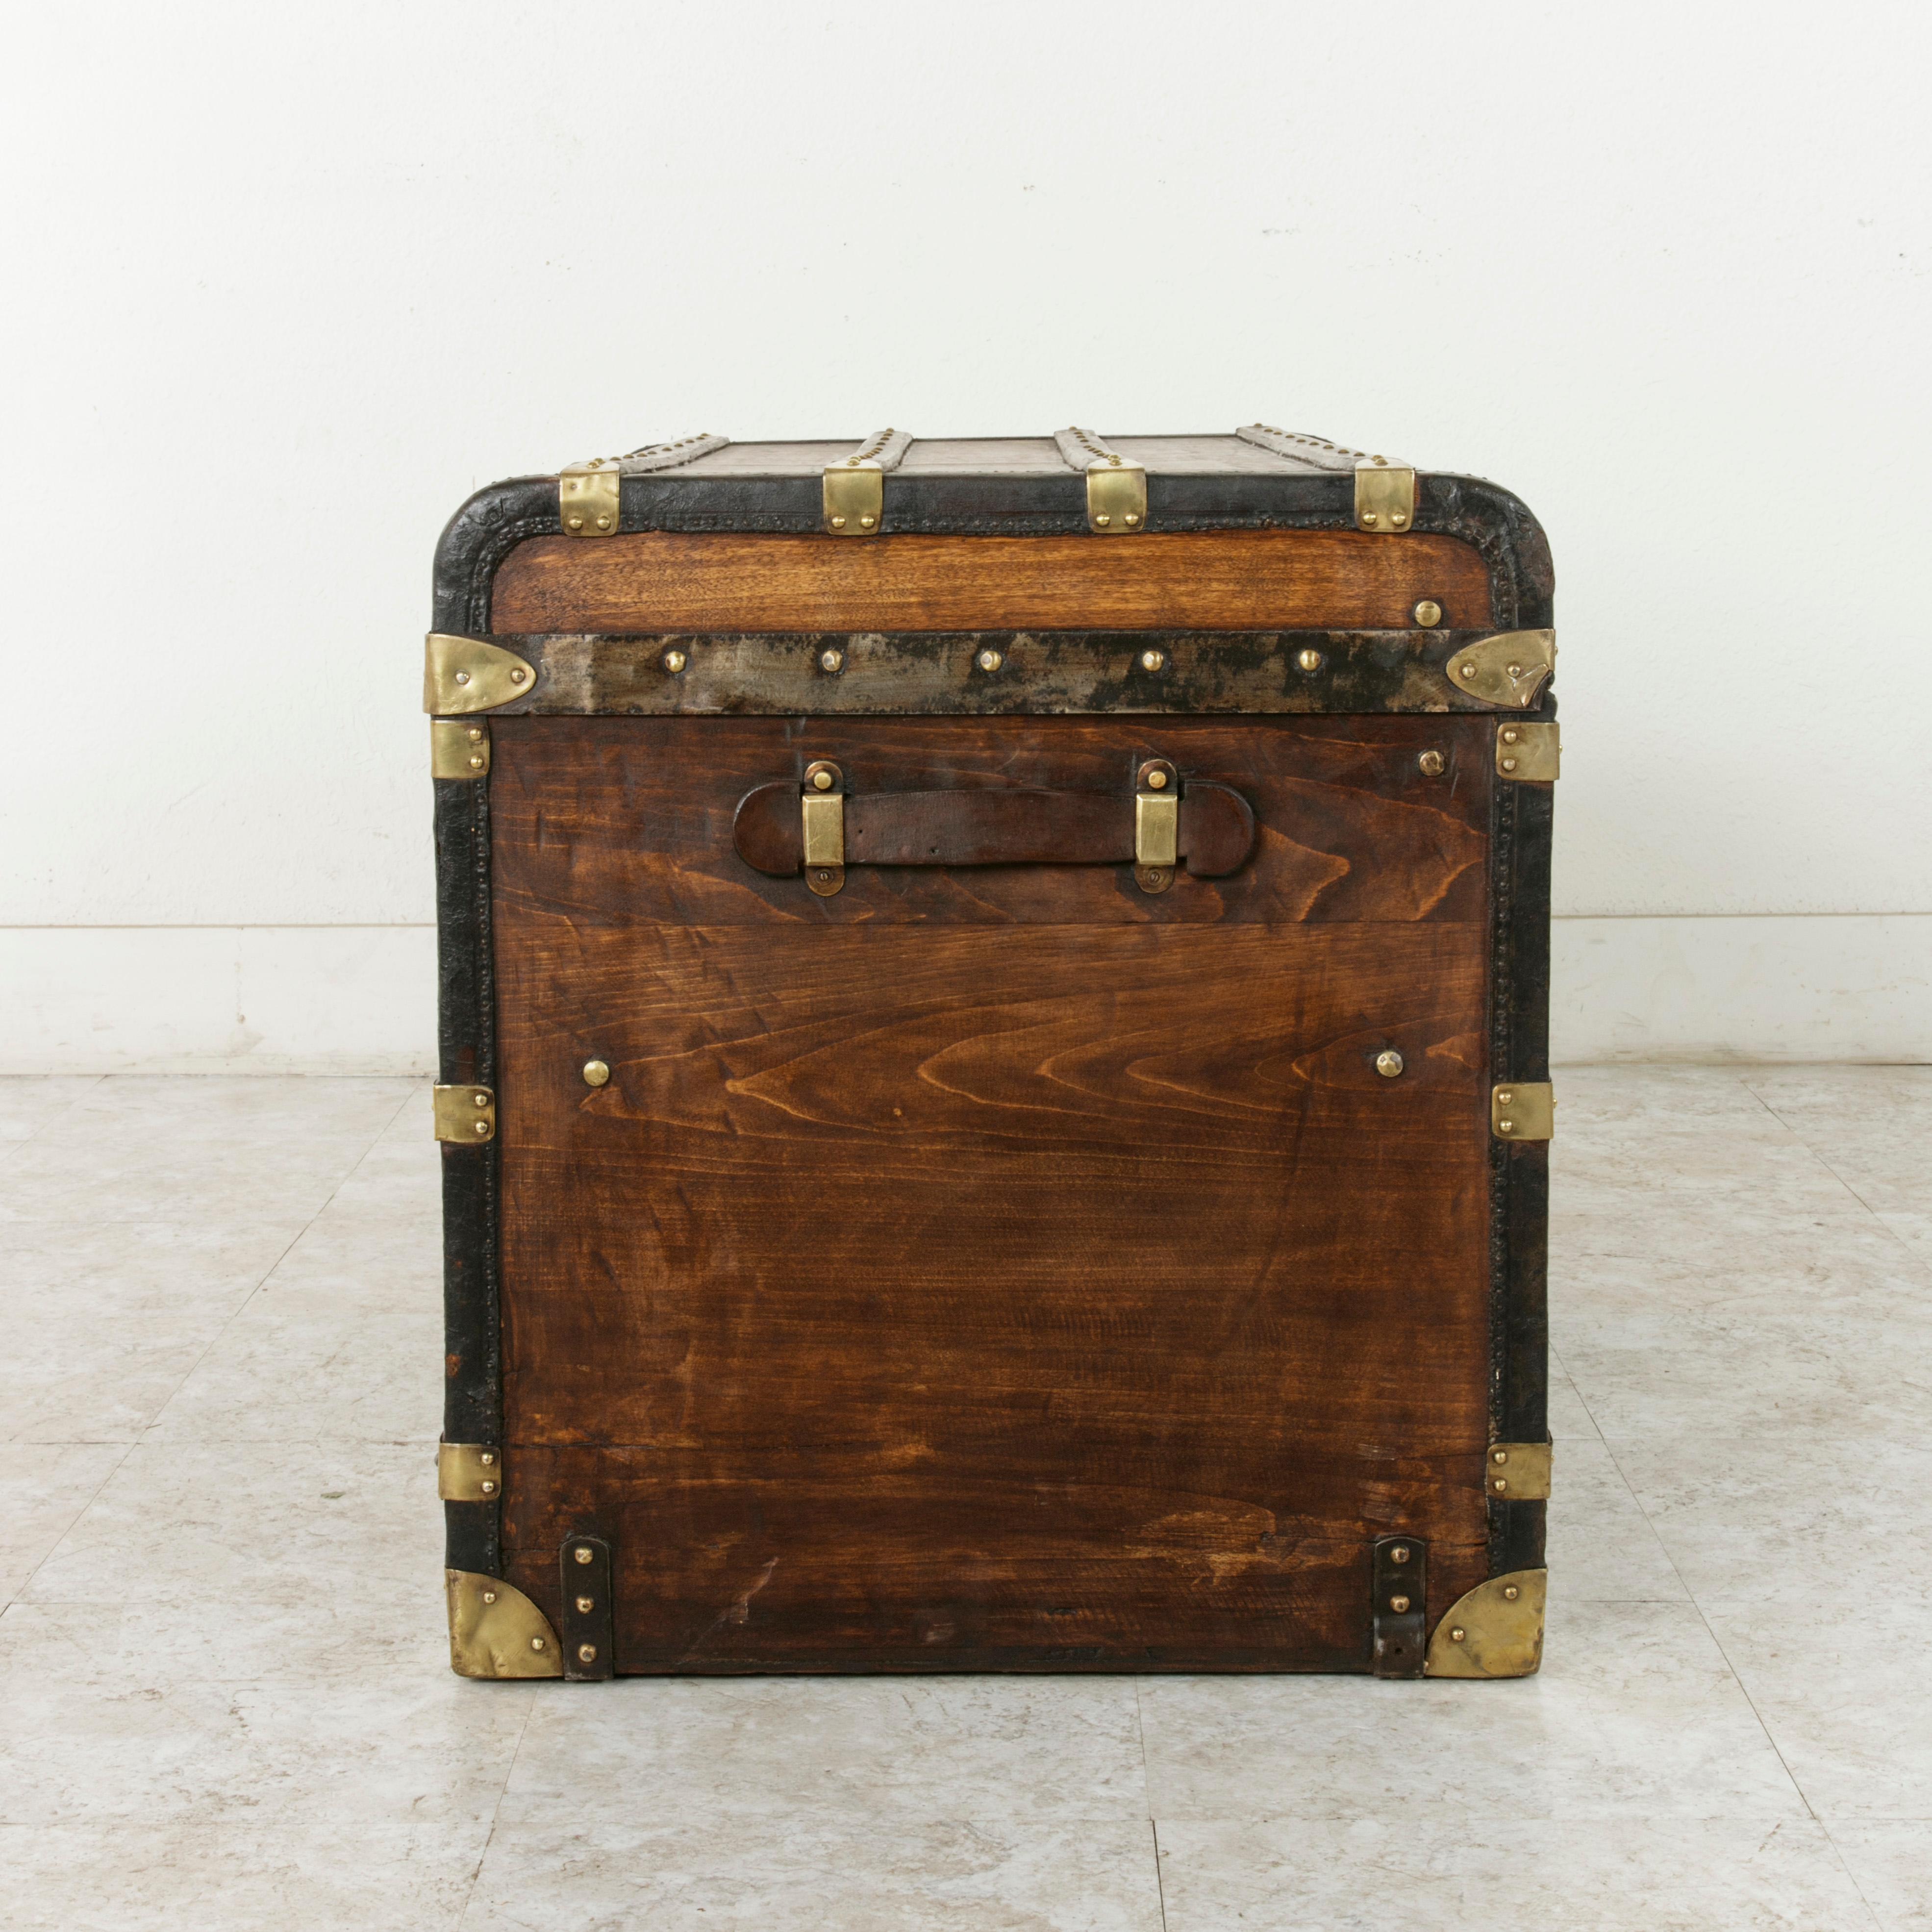 Early 20th Century French Wooden Steam Trunk with Runners, Brass, Iron, Leather Details, circa 1900